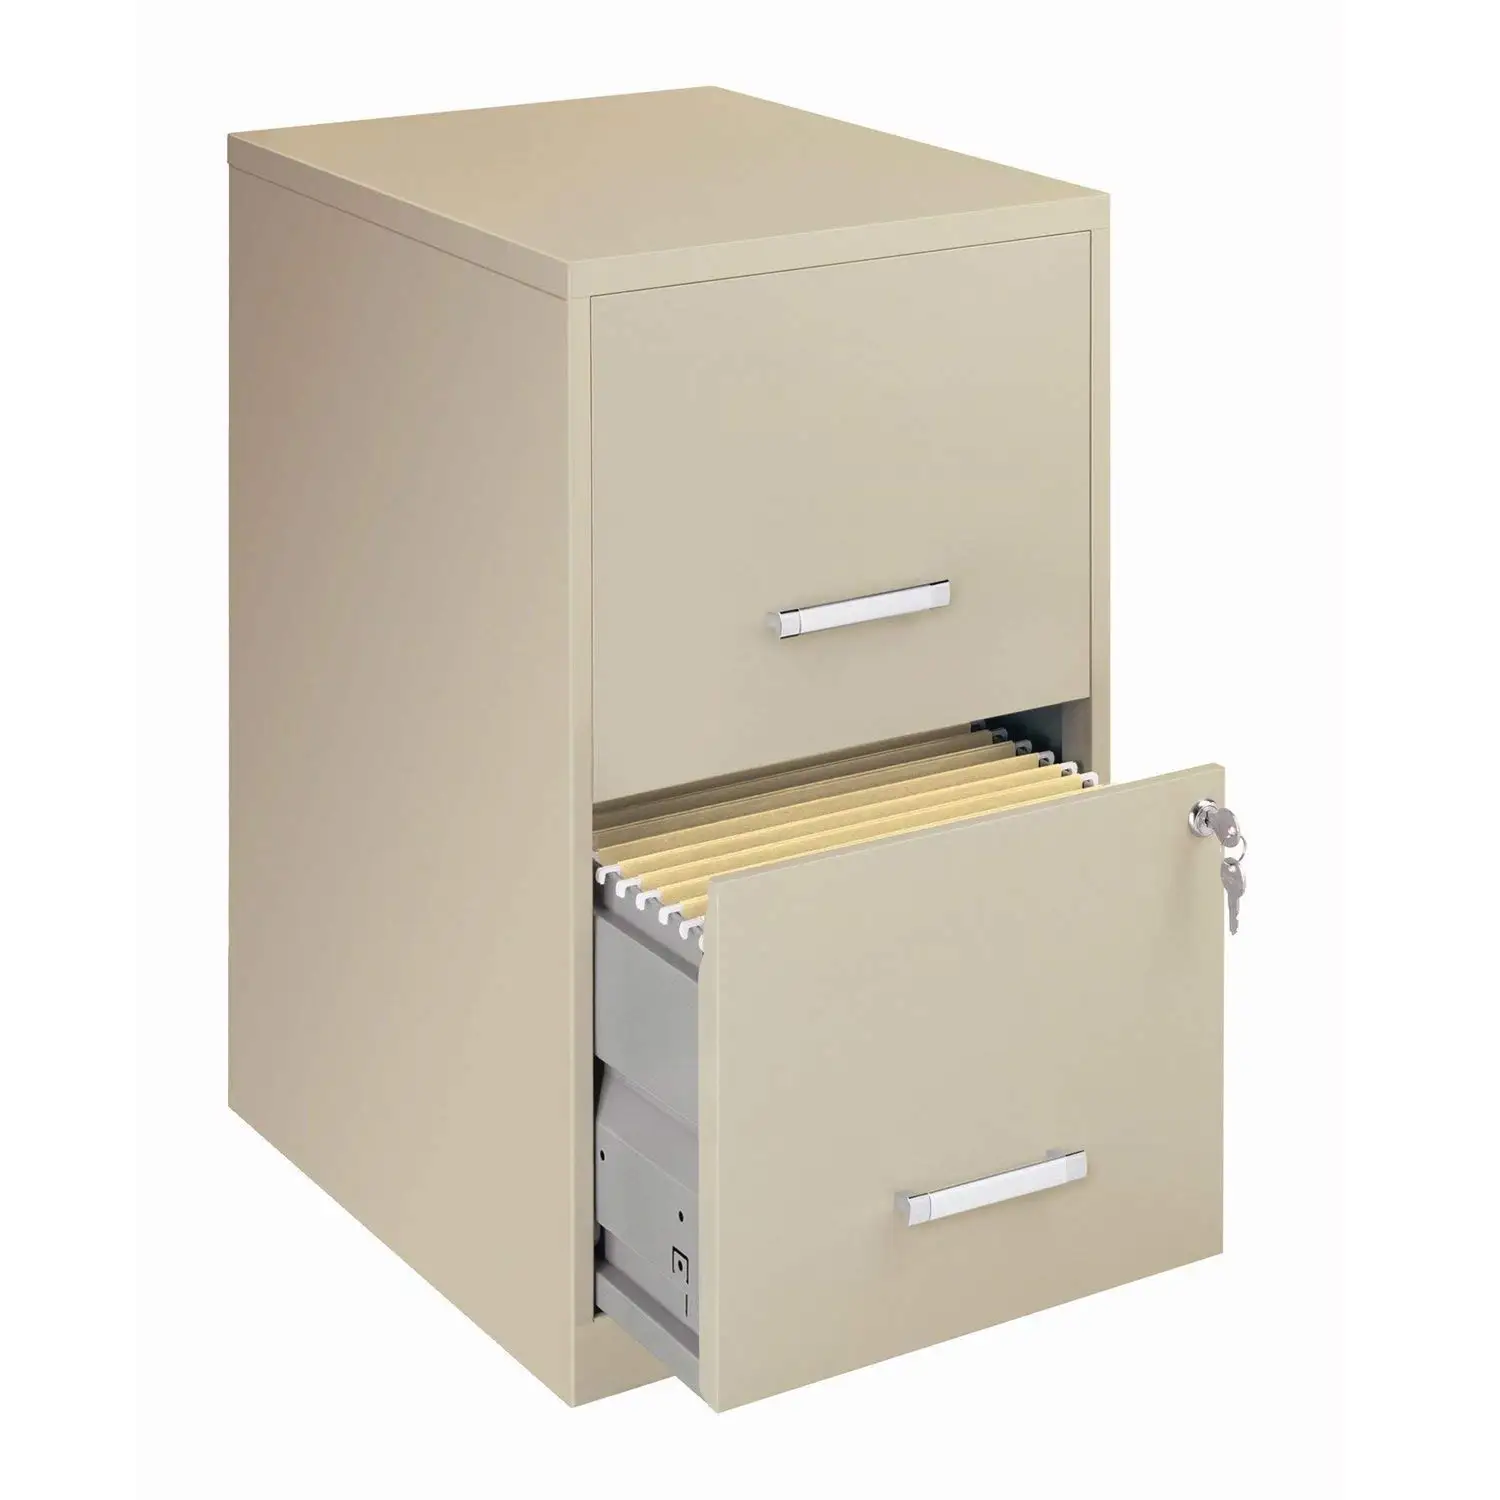 Cheap 4 Drawer Vertical Wood File Cabinet Find 4 Drawer Vertical Wood File Cabinet Deals On Line At Alibaba Com